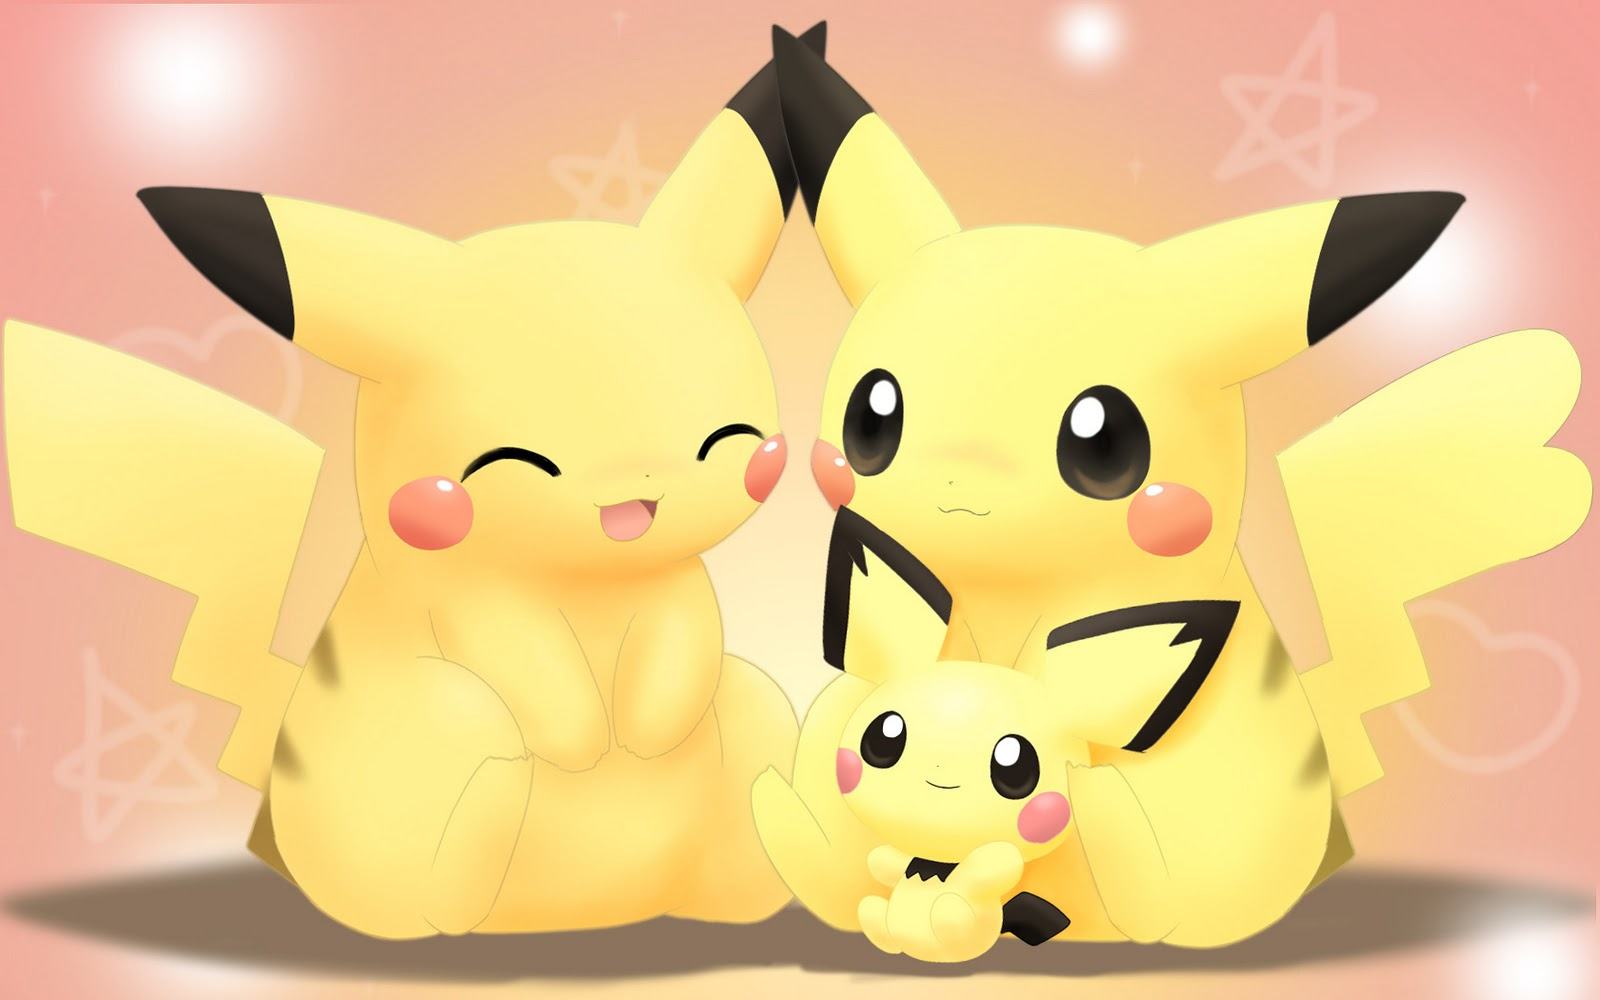 Cute Pokemon Wallpaper For Iphone Wallpapers backgrounds